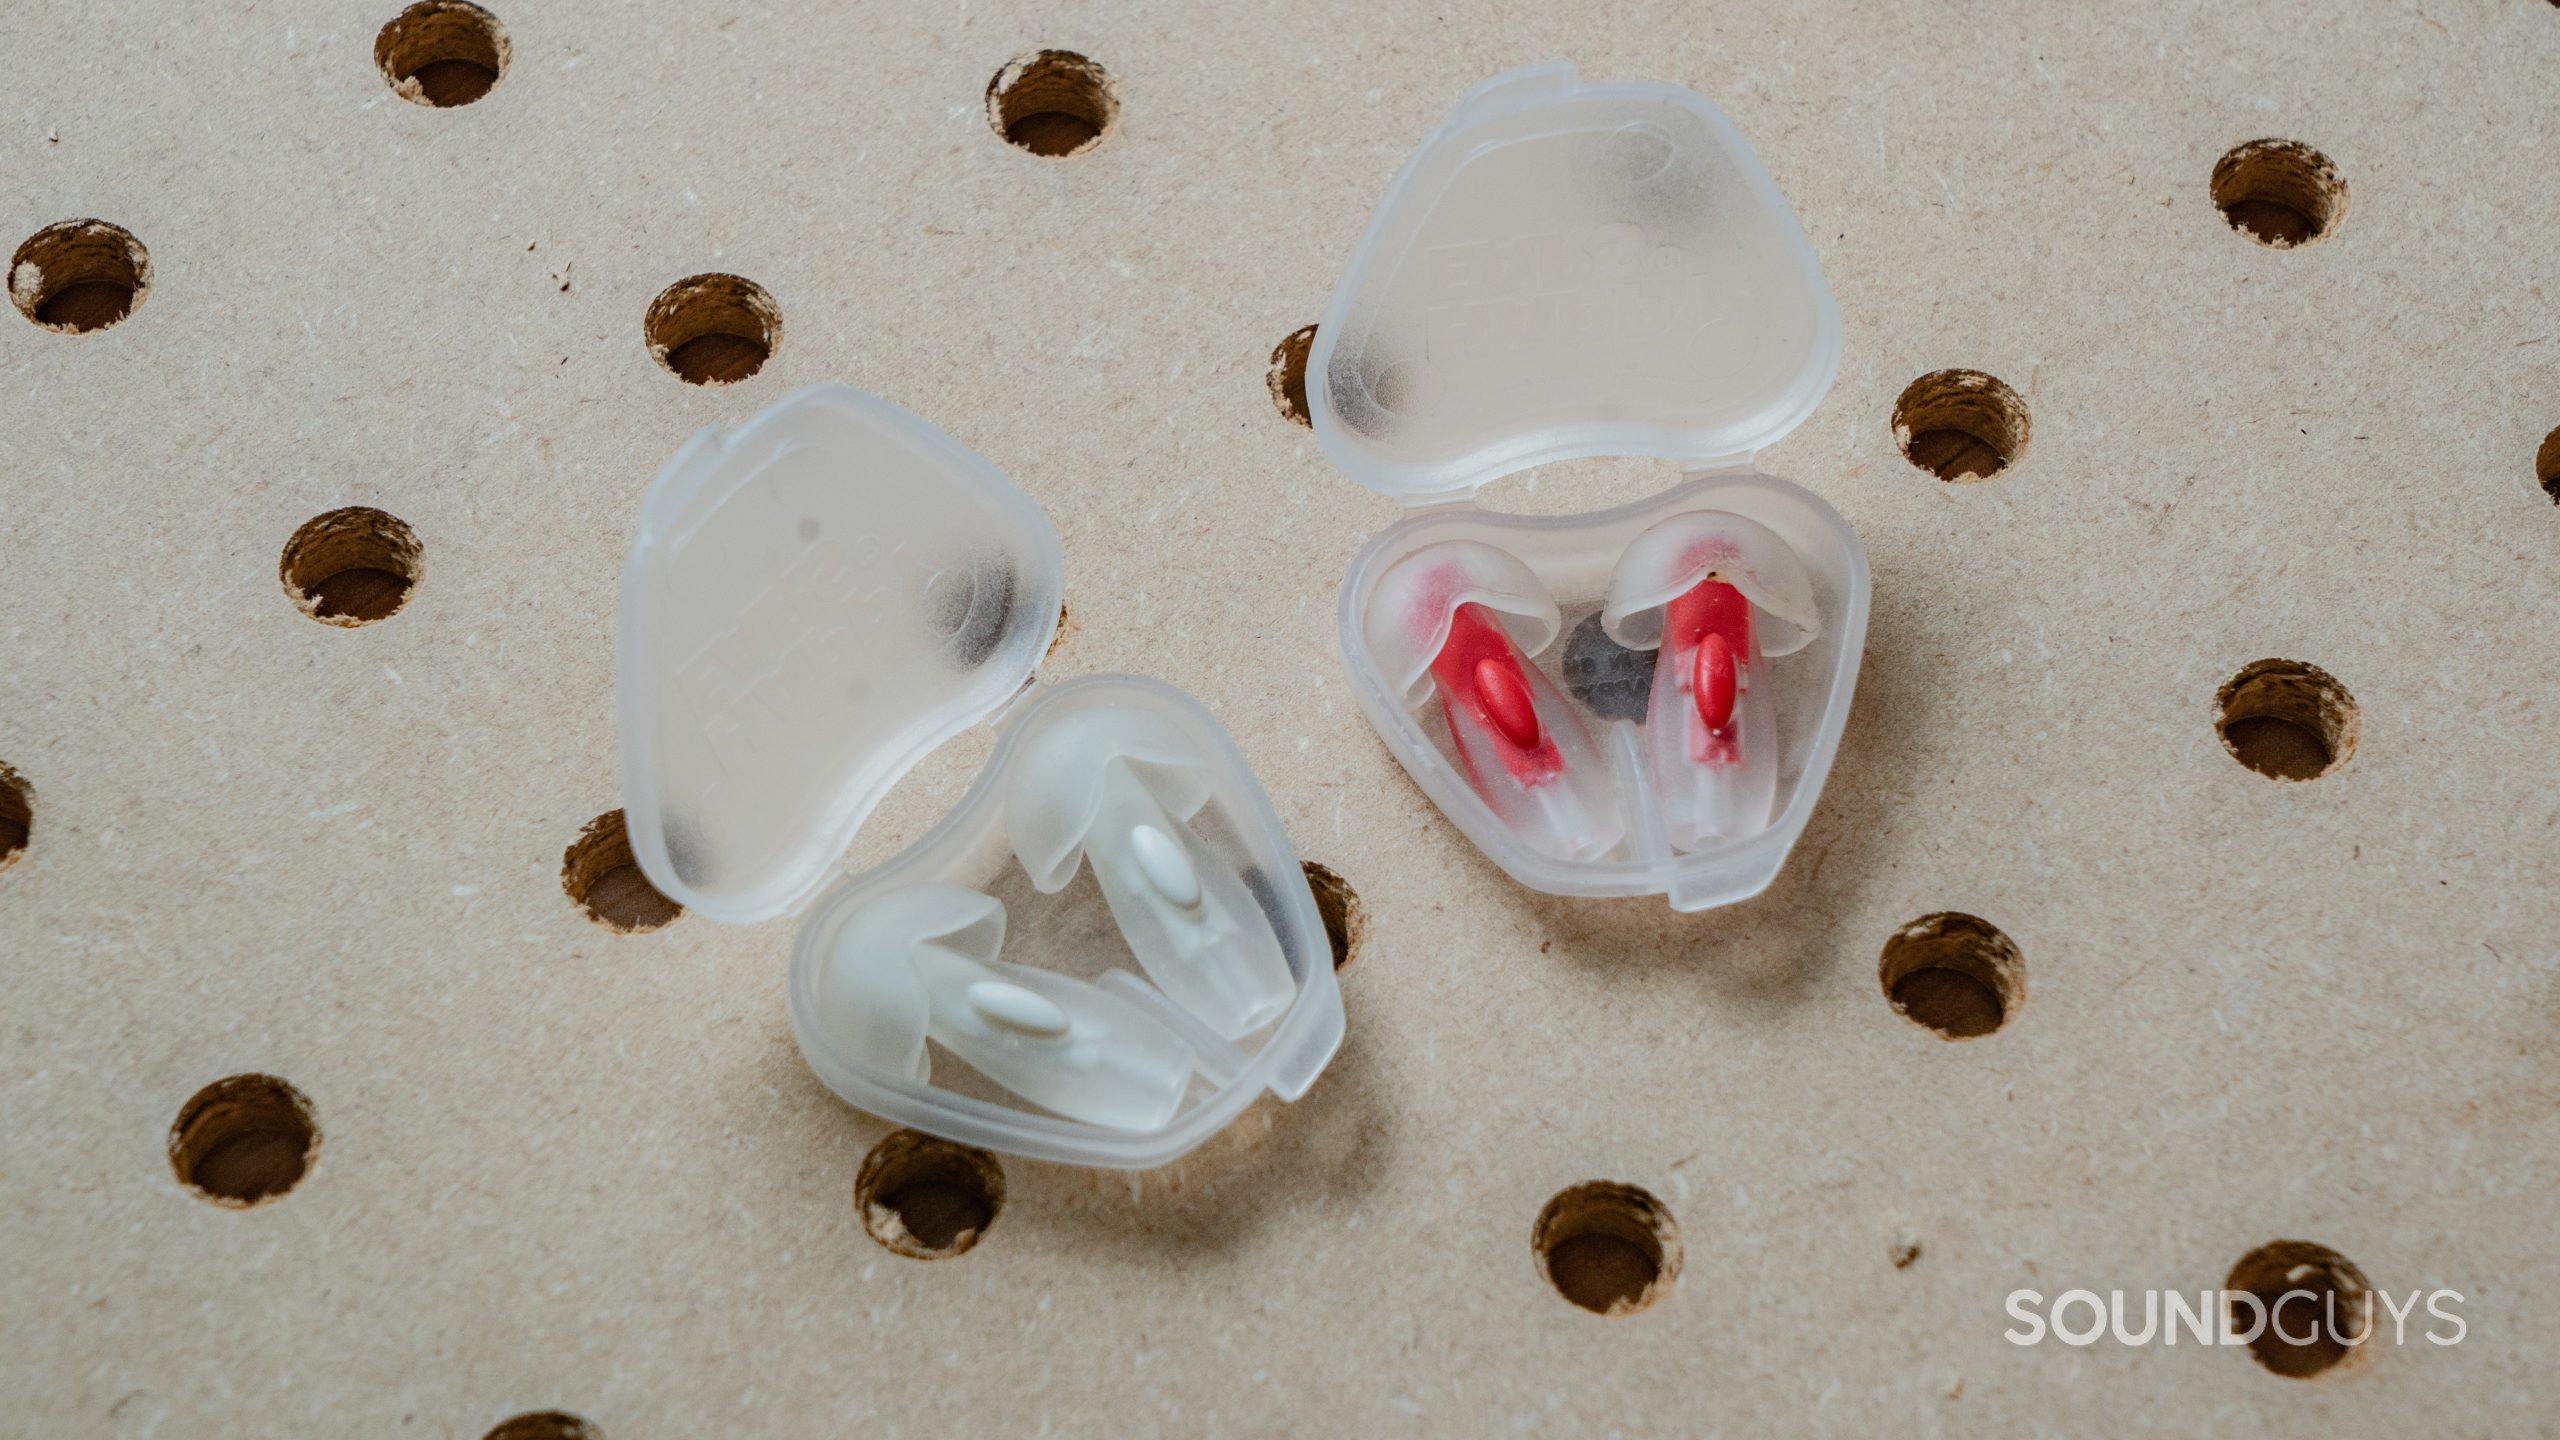 Happy Ears Reusable Natural Sound Ear Plugs - Version 2.0 (Sizes